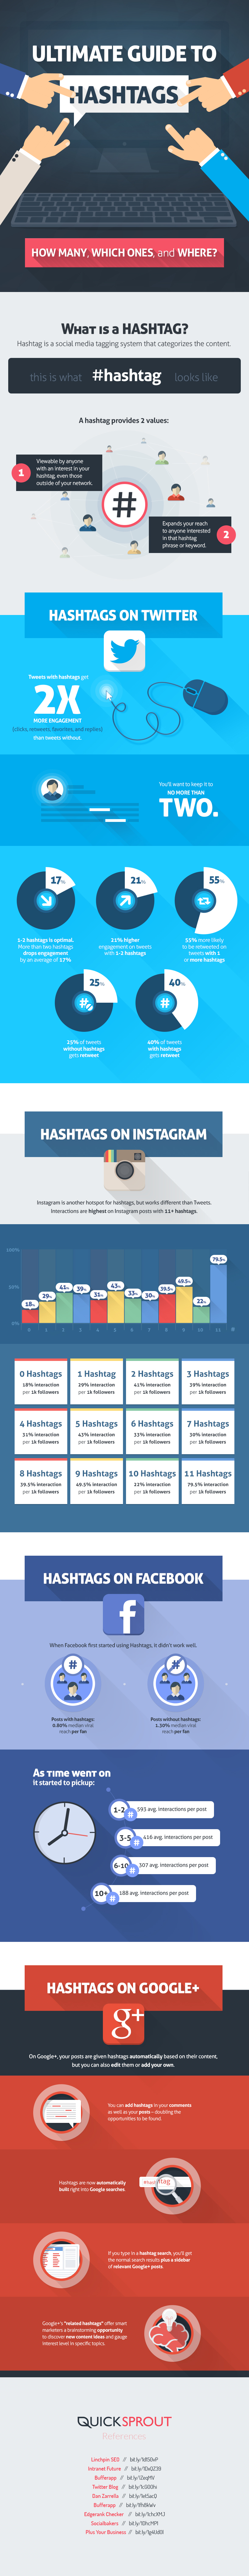 The Ultimate Guide to Hashtags #Infographic